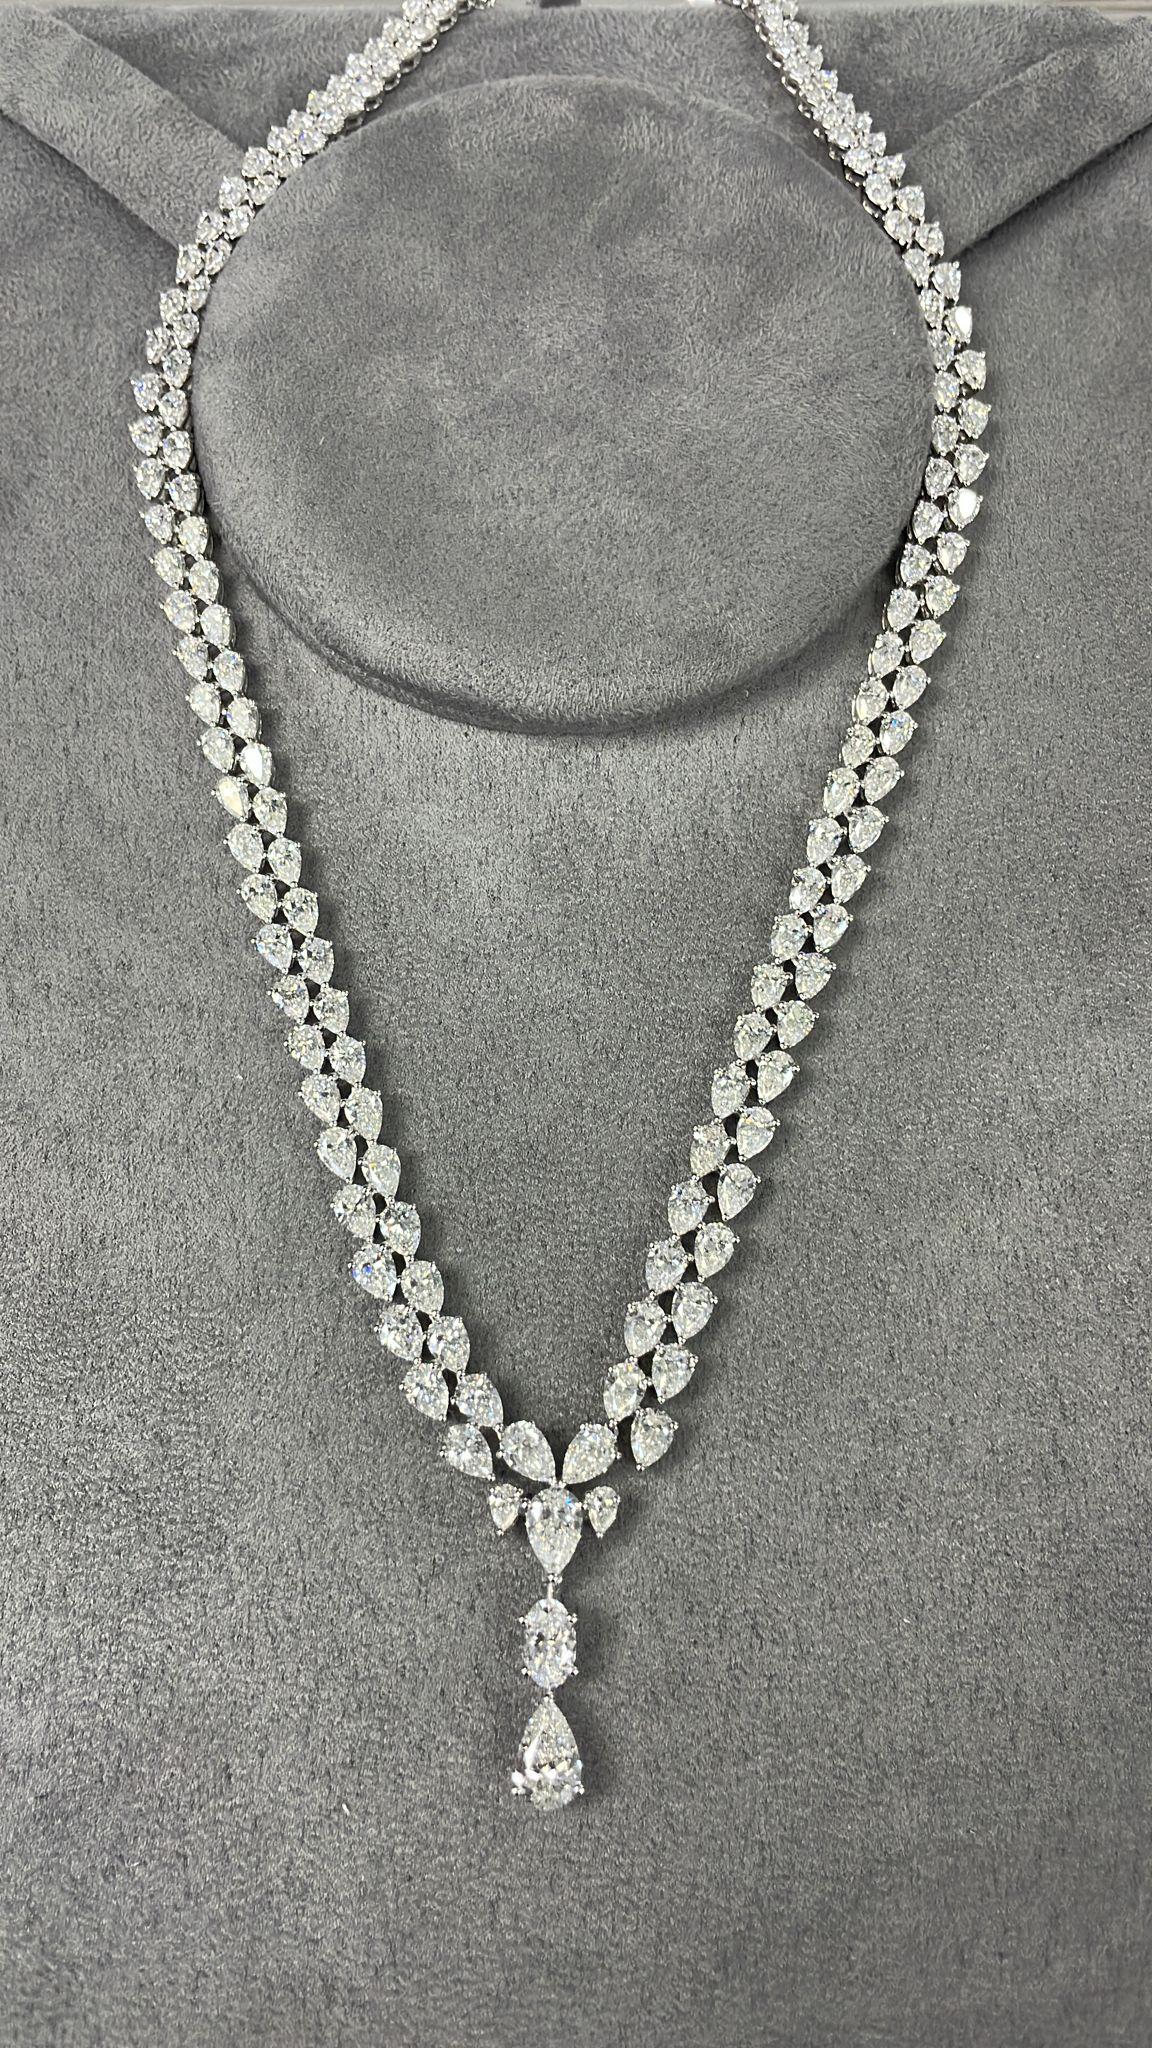 The Following Item we are offering is a Rare Important Gorgeous 18KT White Gold Winston Style Glistening GIA CERTIFIED Fancy Diamond Drop Necklace!!!! This Necklace is Outstanding Multi Pear Shaped Glittering Diamond Necklace with 2 Large GIA